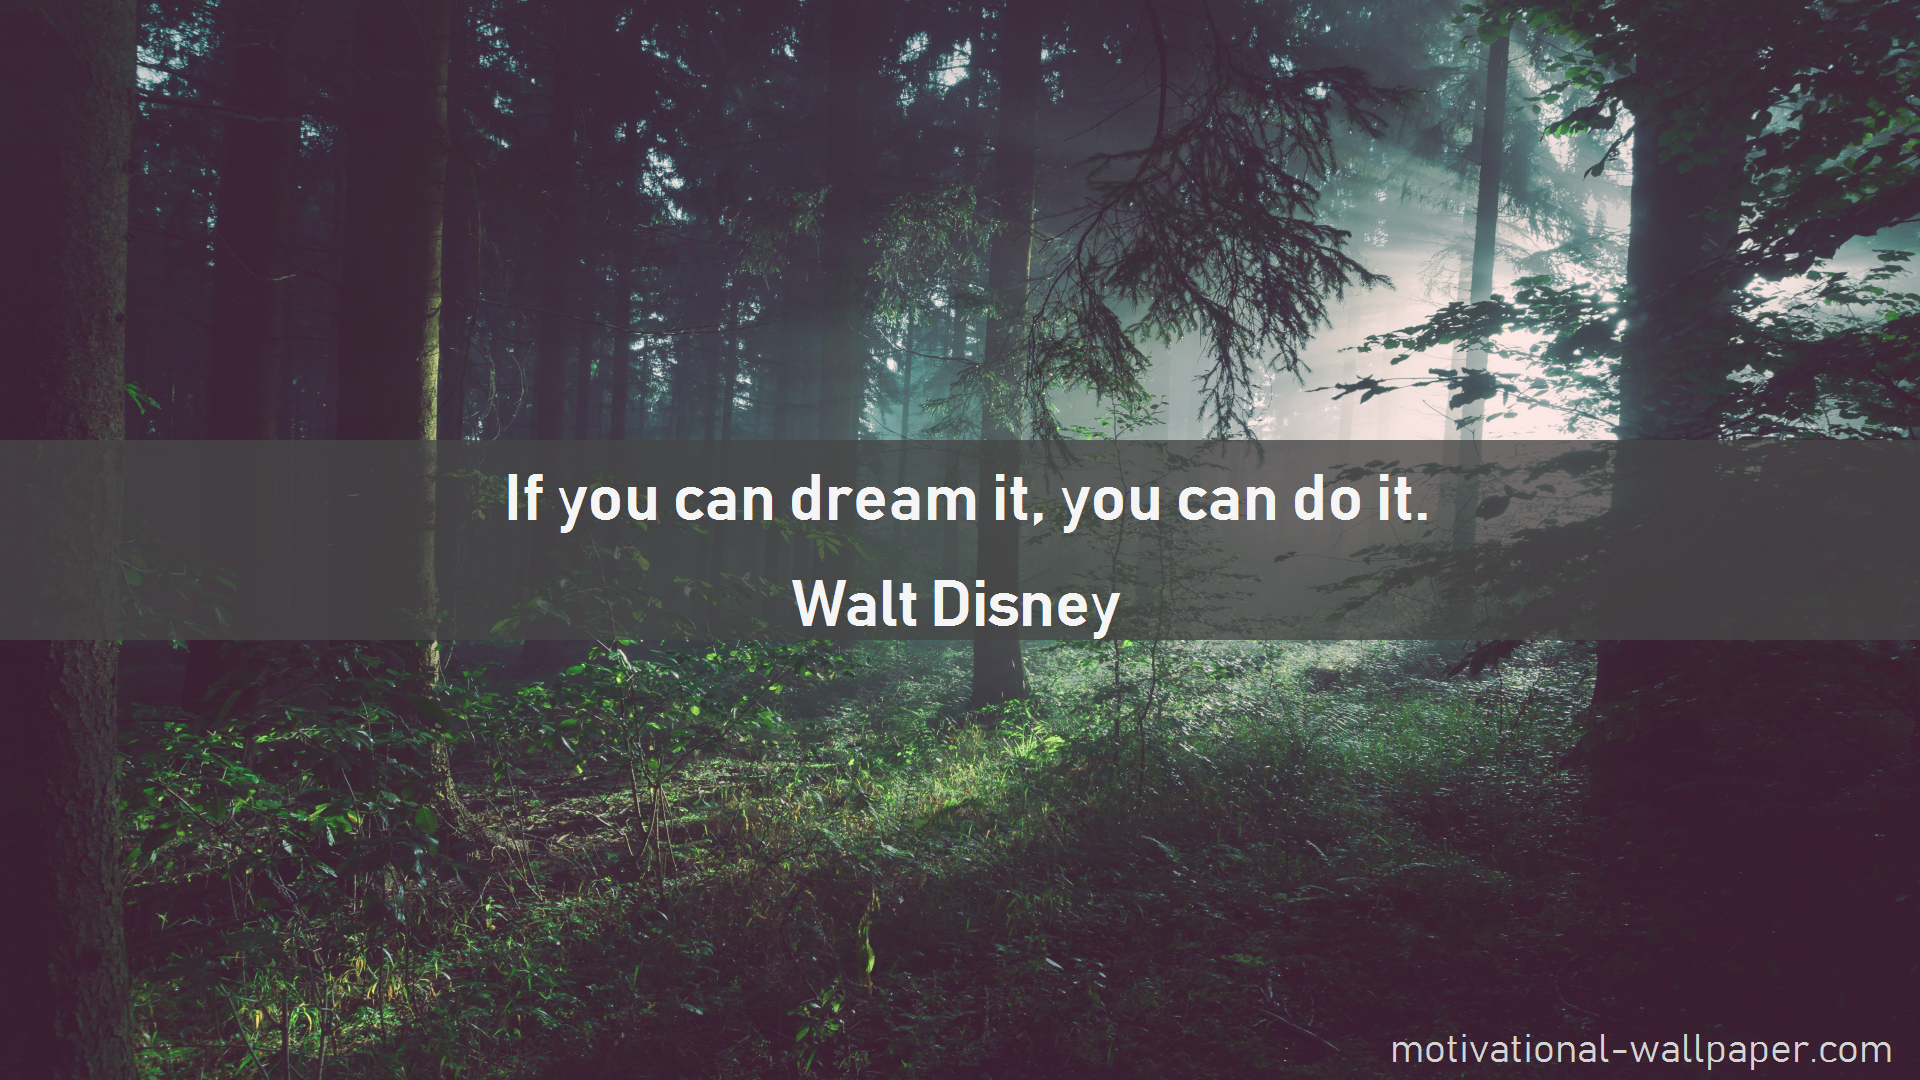 If you can keep your. If you can Dream it you can do it Wallpaper. You can do it обои. Dream обои. If you can Dream it you can do it Walt Disney.